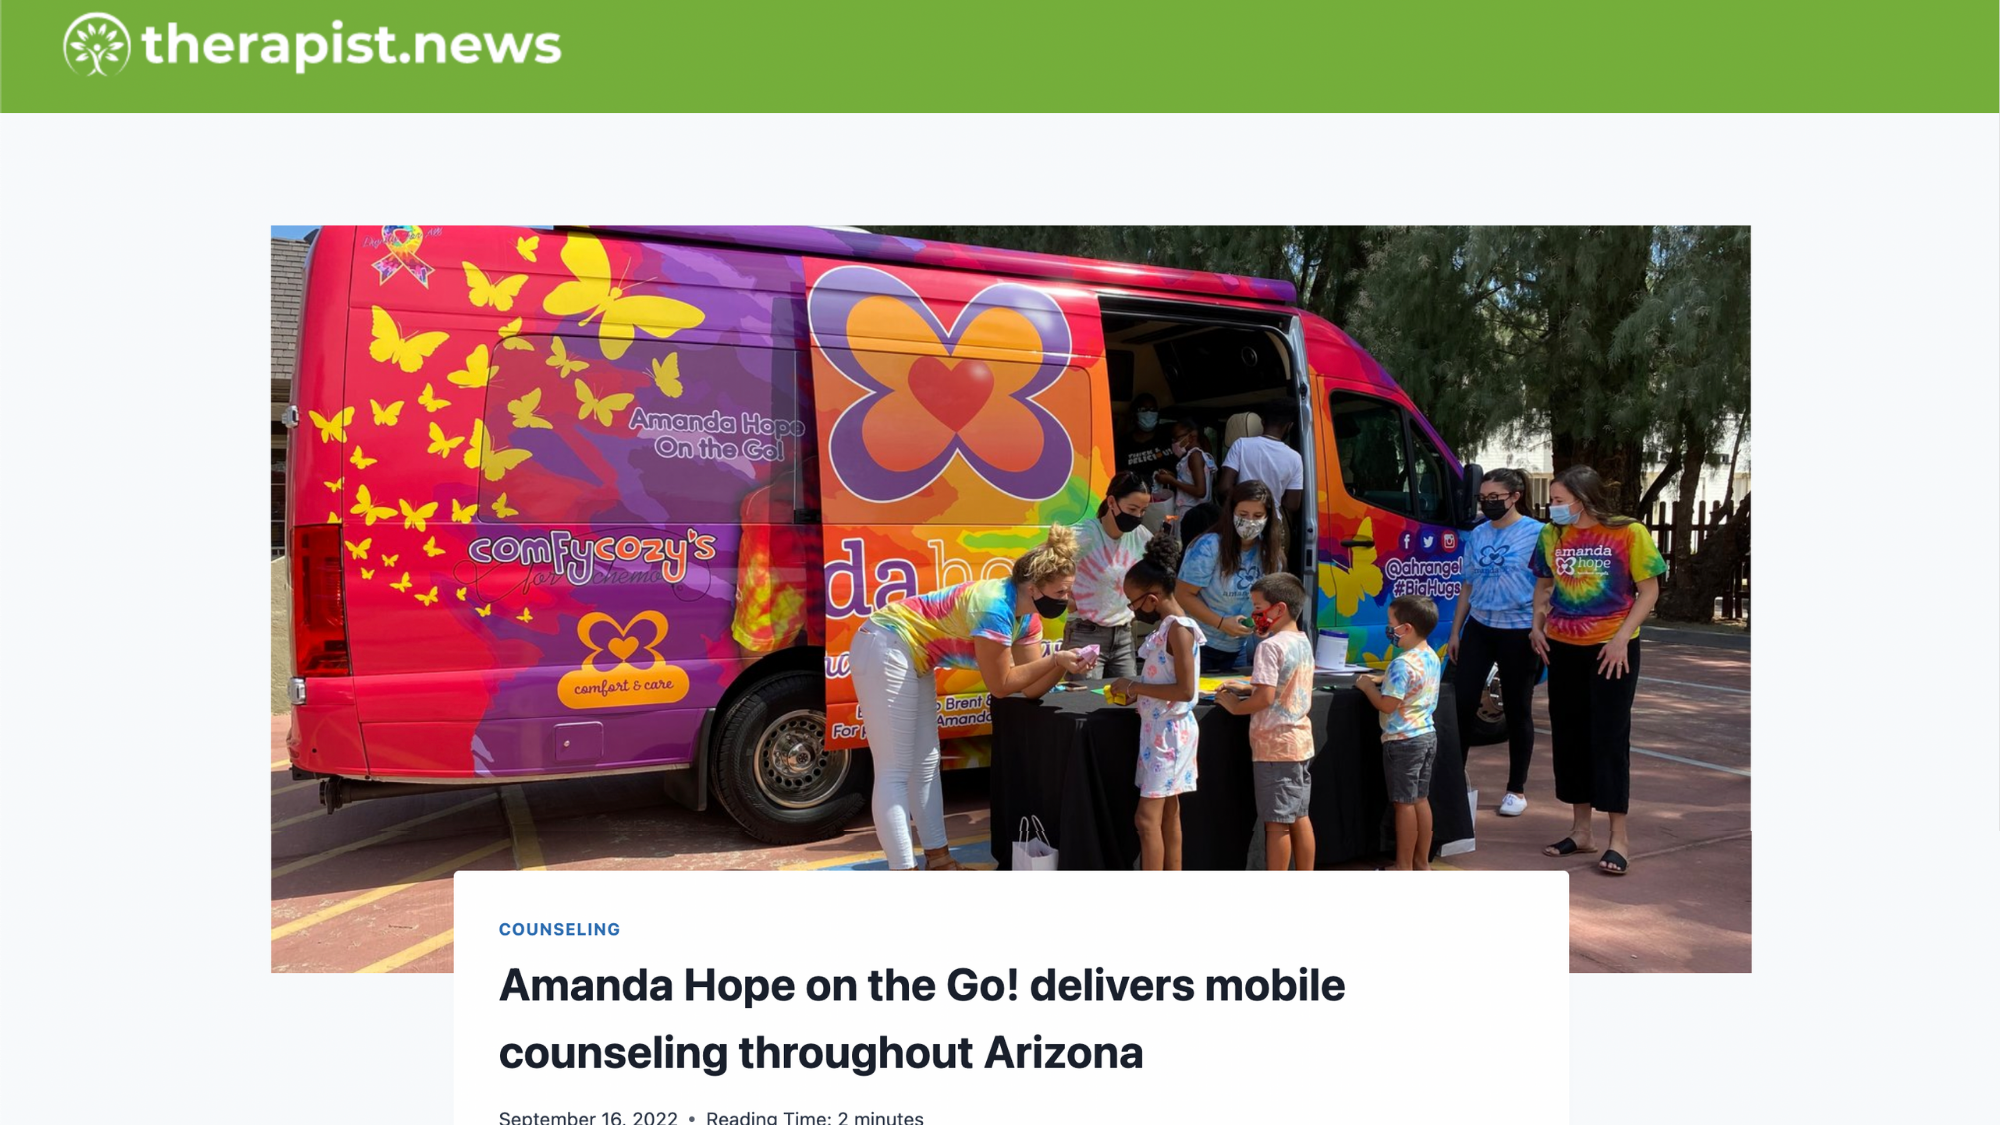 Therapistnews: Amanda Hope on the Go! delivers mobile counseling throughout Arizona (Copy)